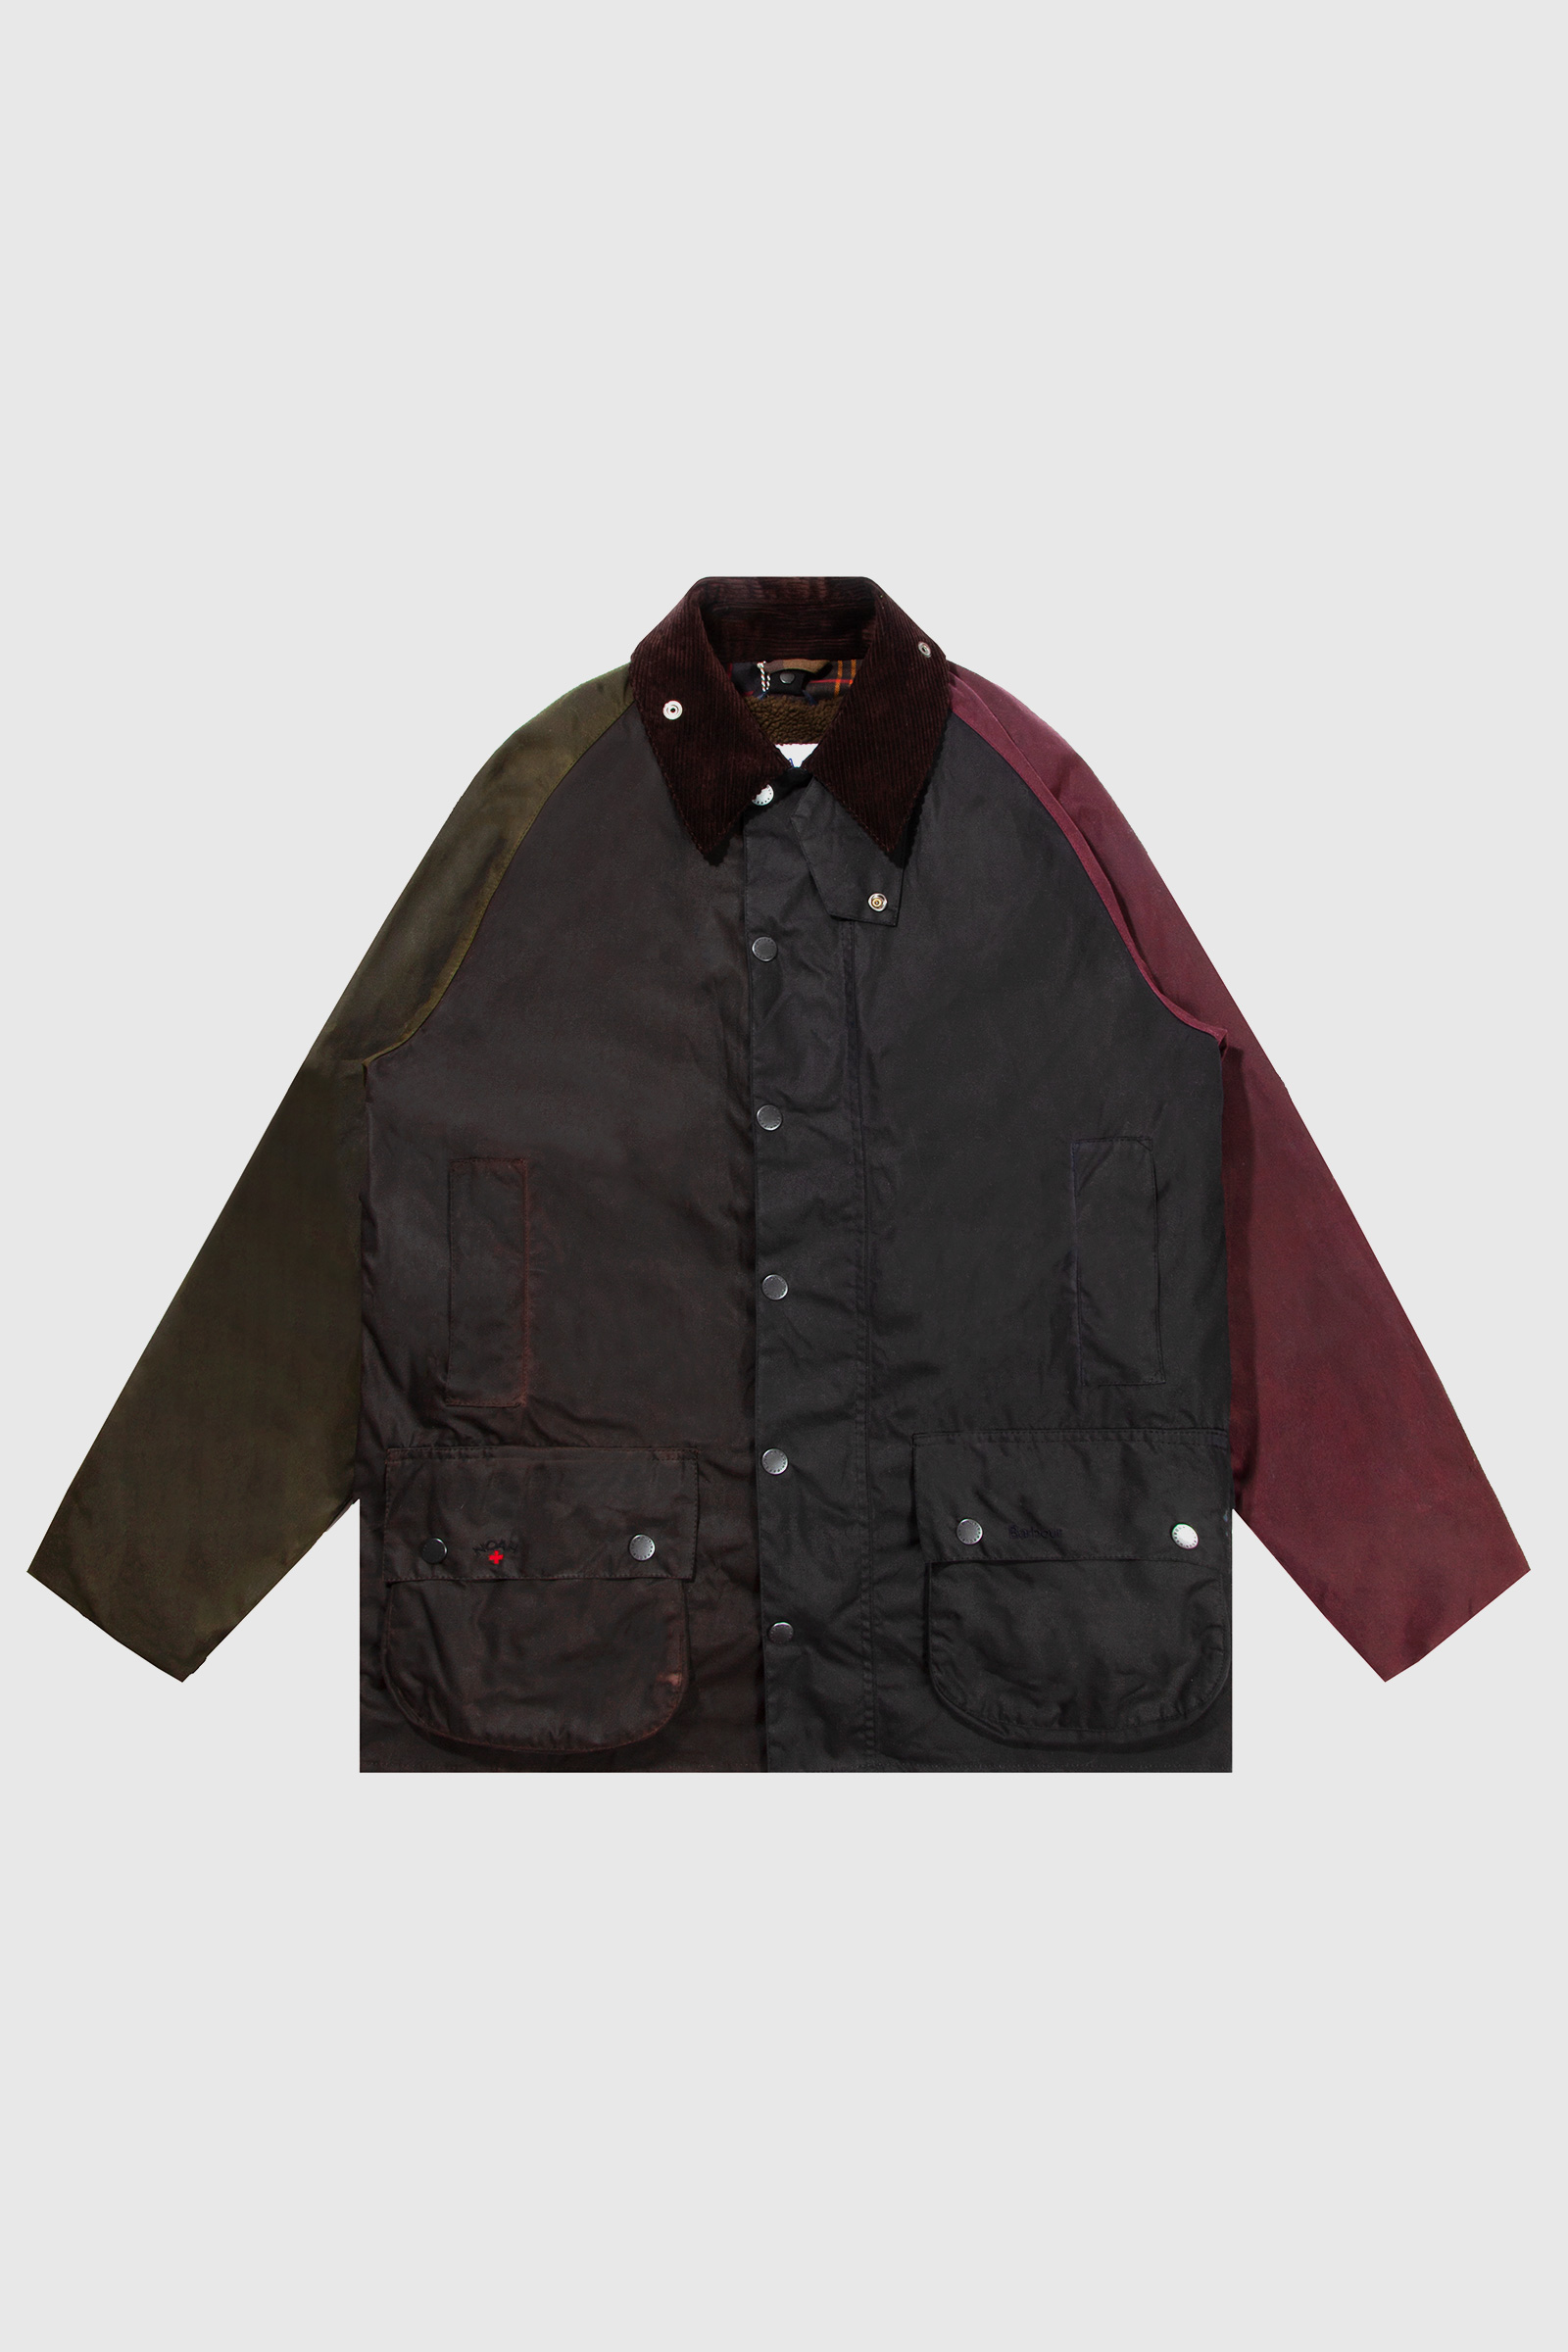 cost of a barbour jacket